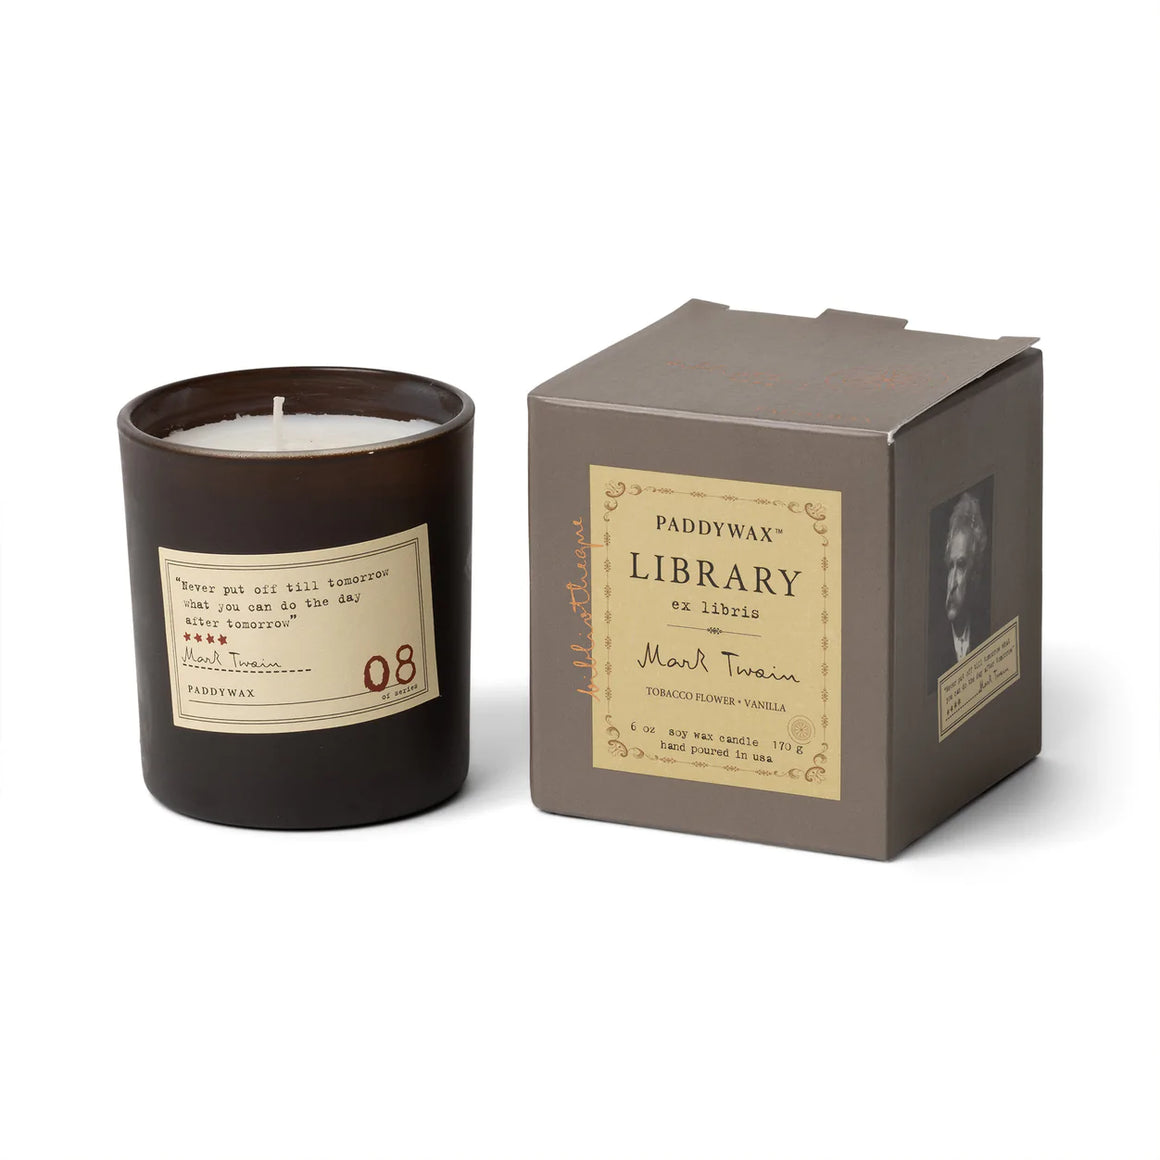 Library Candle Collection - Boxed Glass Vessel